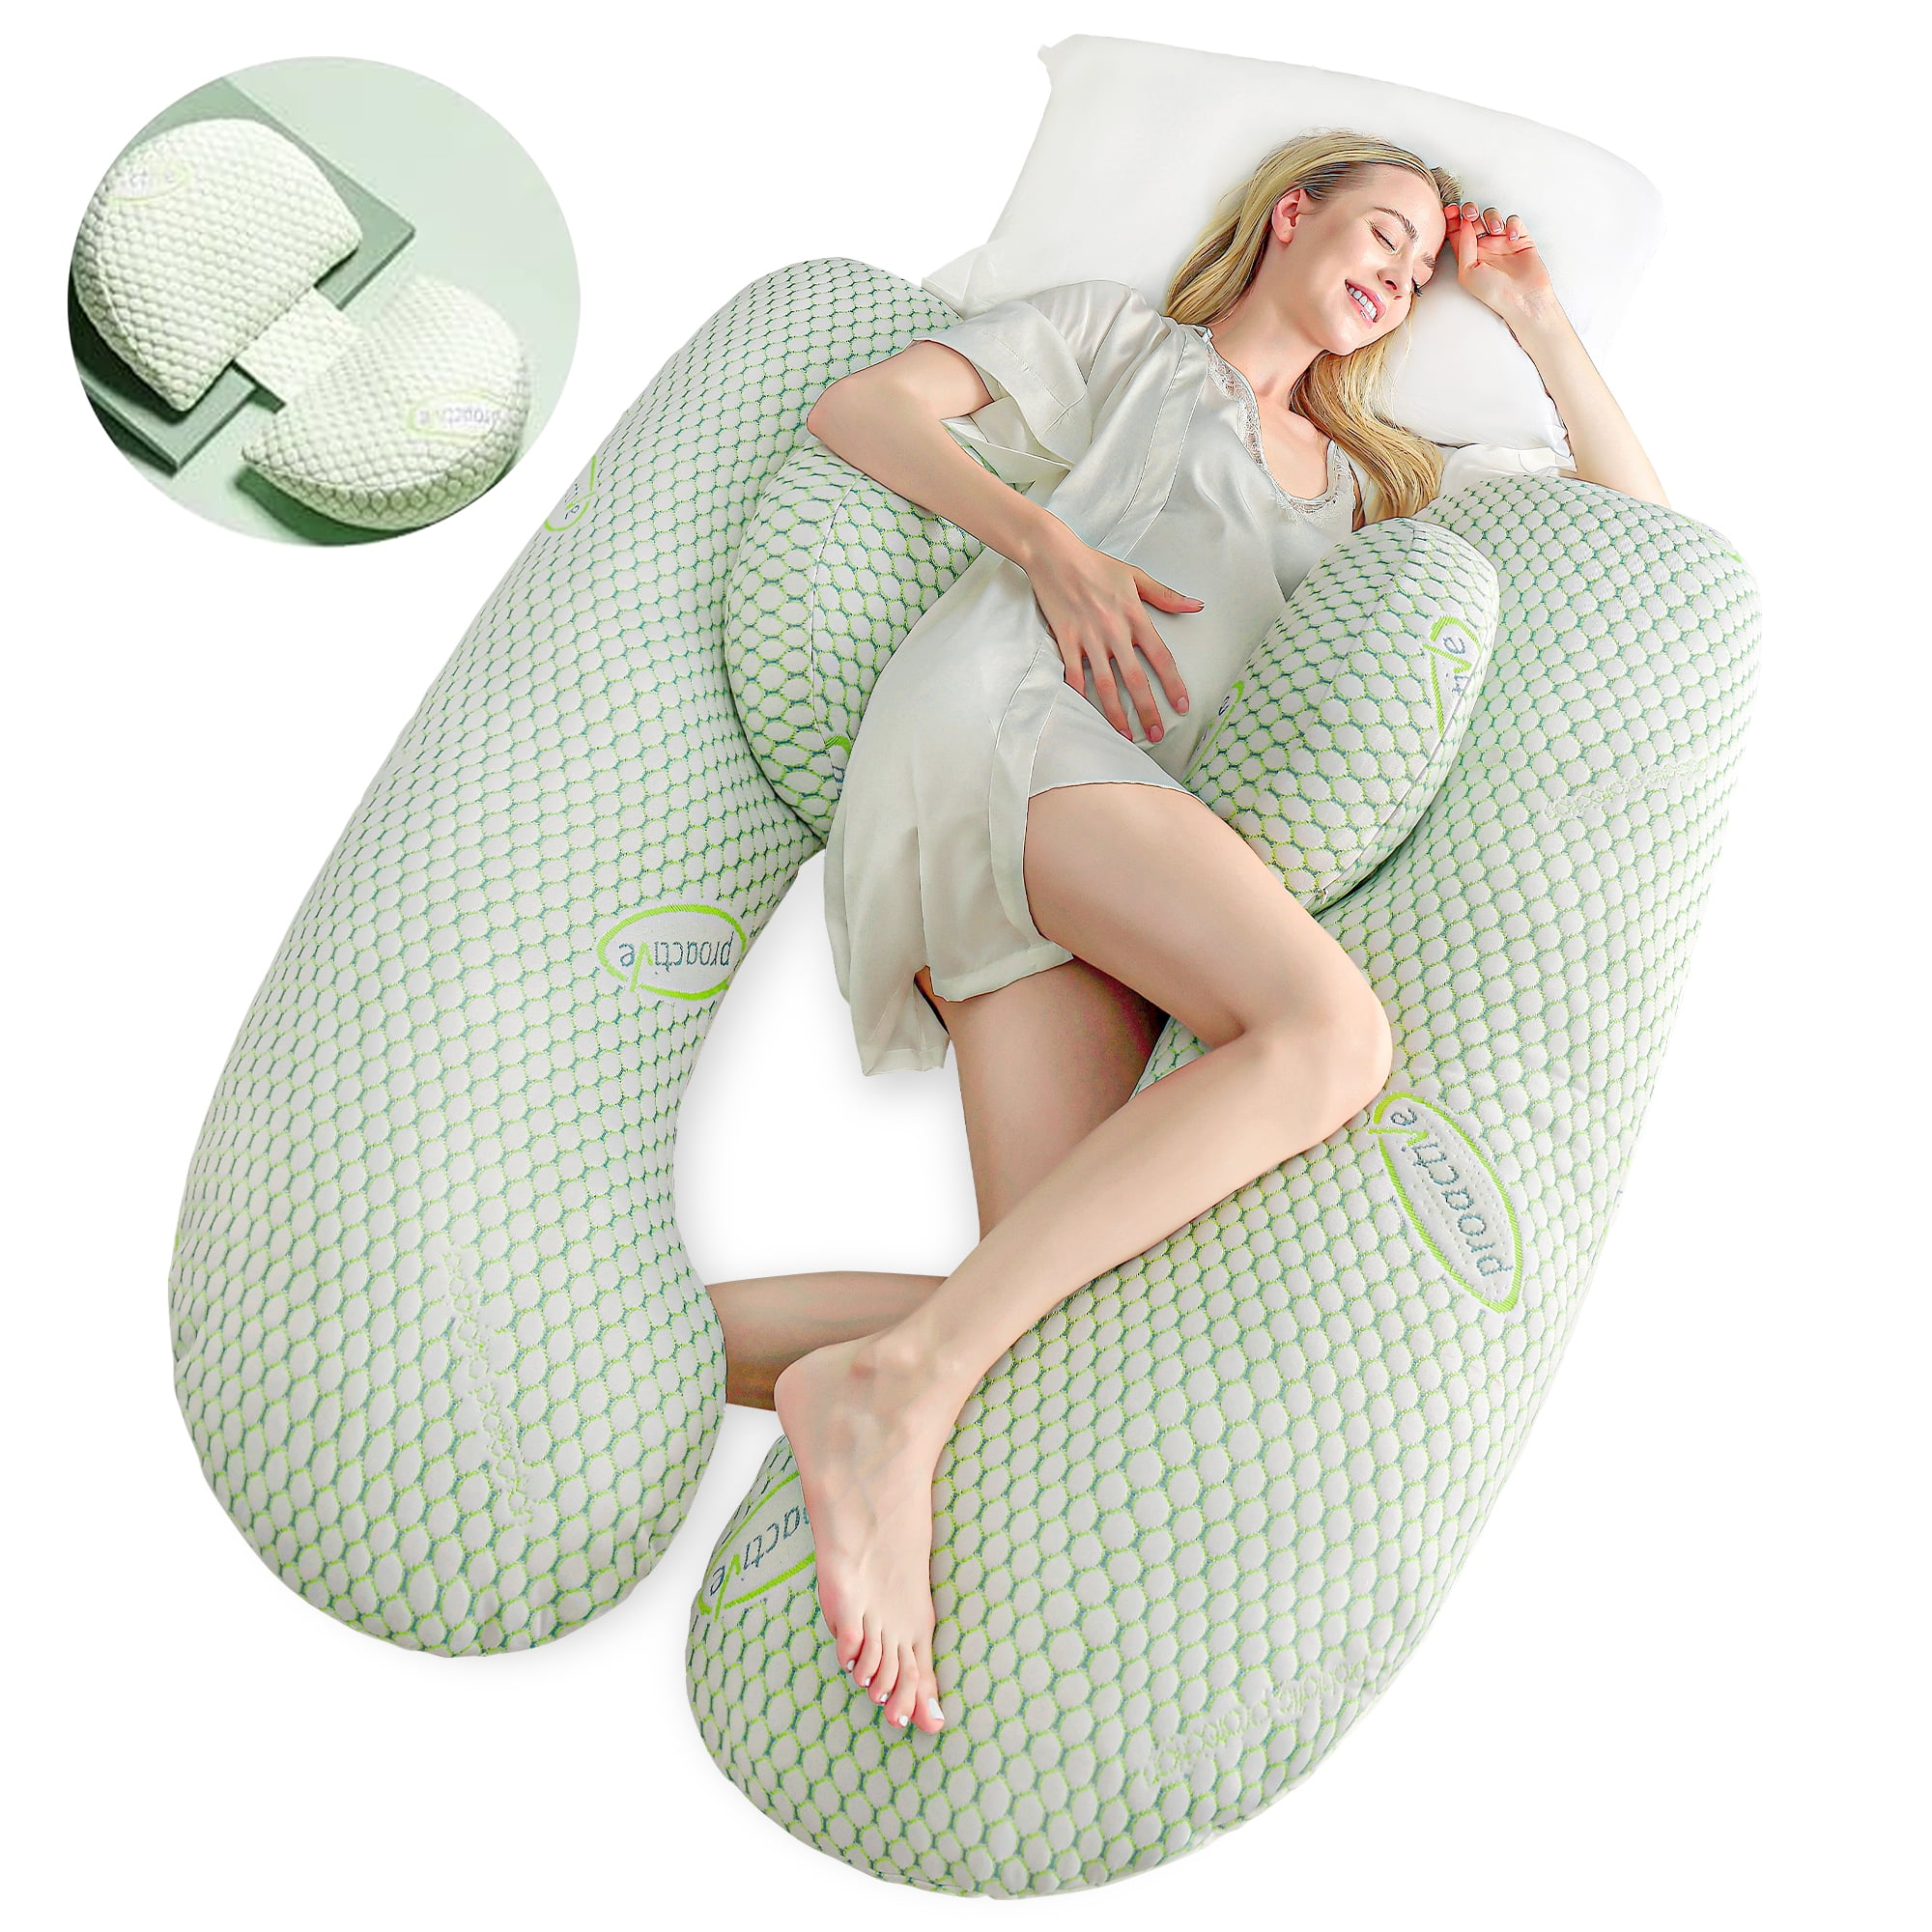 INSEN Pregnancy Pillow for Sleeping,Maternity Body Pillow for Pregnancy  Women,Pregnancy Support Pillow for Back, Hip Pain, Green